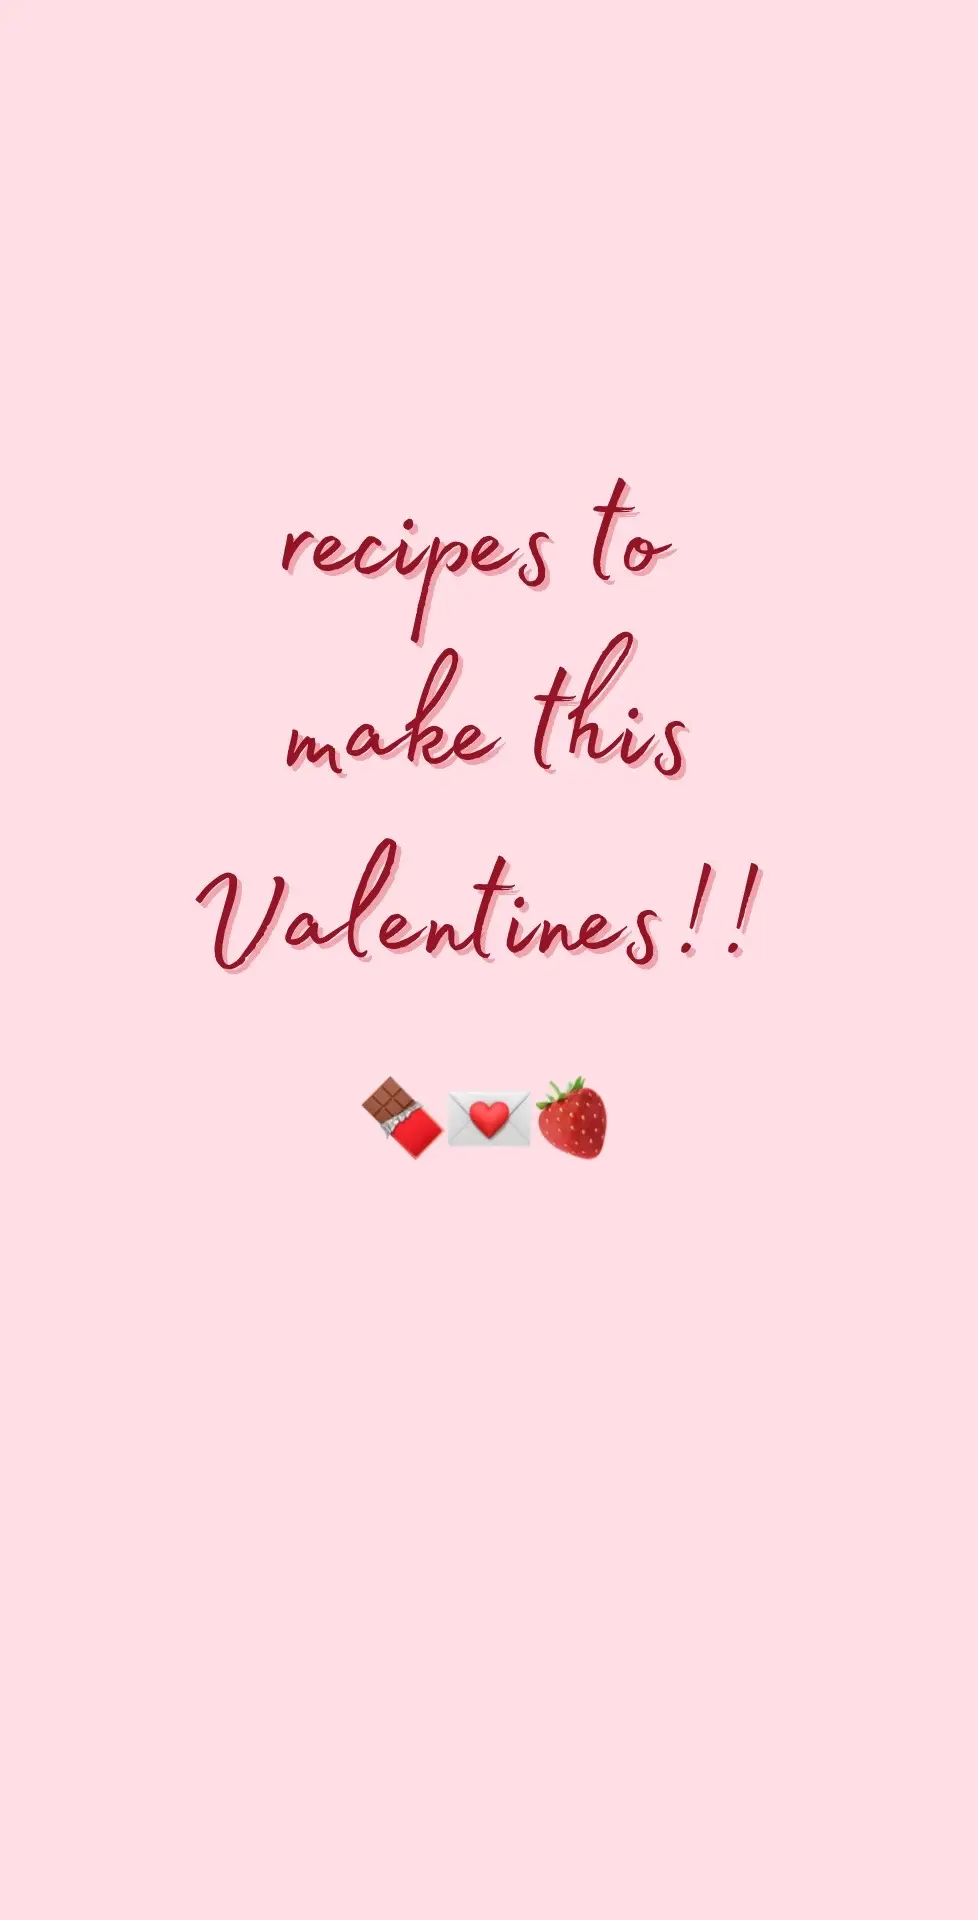 Cute delicious desserts to make this valentines to share with your s/o or bestie!  Full recipe deets can be found on the ReciMe app 🥰 #valentines #desserts #baking #recipes #ValentinesDay #galentines #valentinesbaking #valentinesdessert #heartcookies #valentinesinspo #valentinesideas #cookiee #dessertrecipe #churros #strawberrycheesecake #dessertideas 